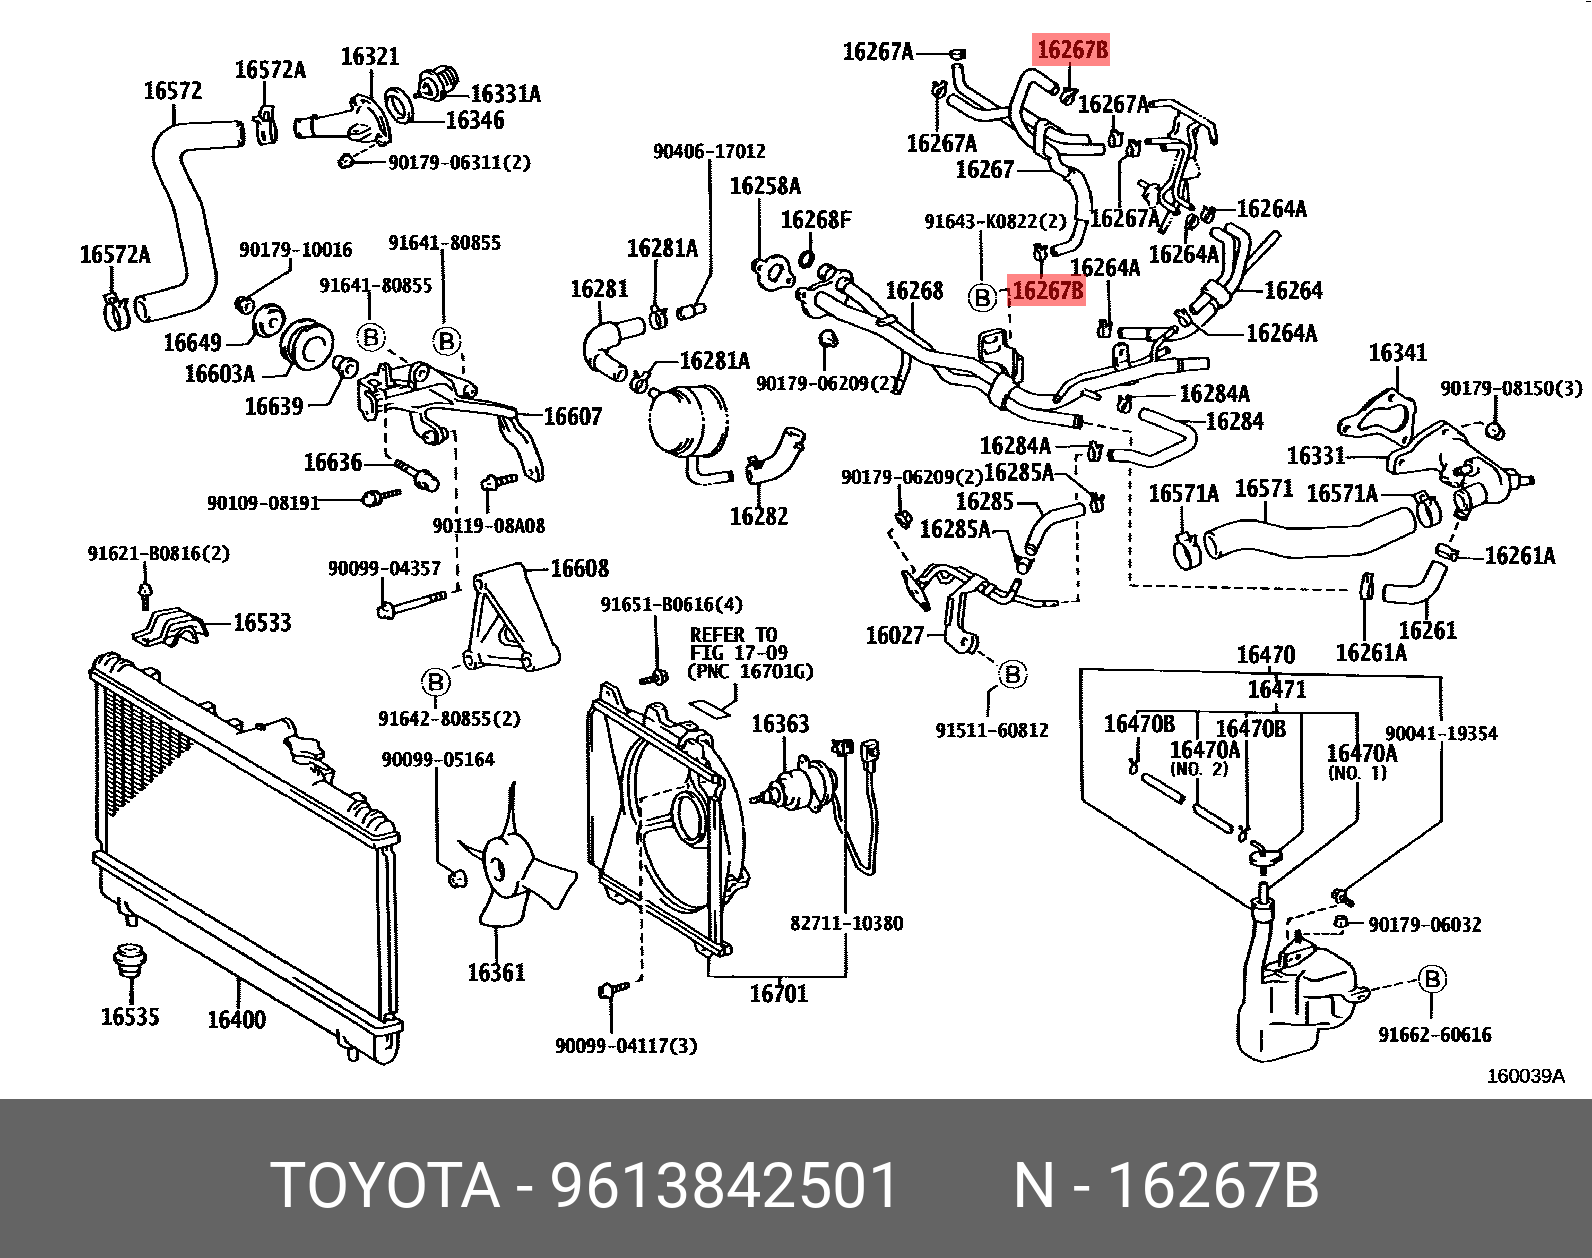 CAMRY HYBRID 201108 - 201704, CLIP OR CLAMP (FOR HEATER WATER HOSE)